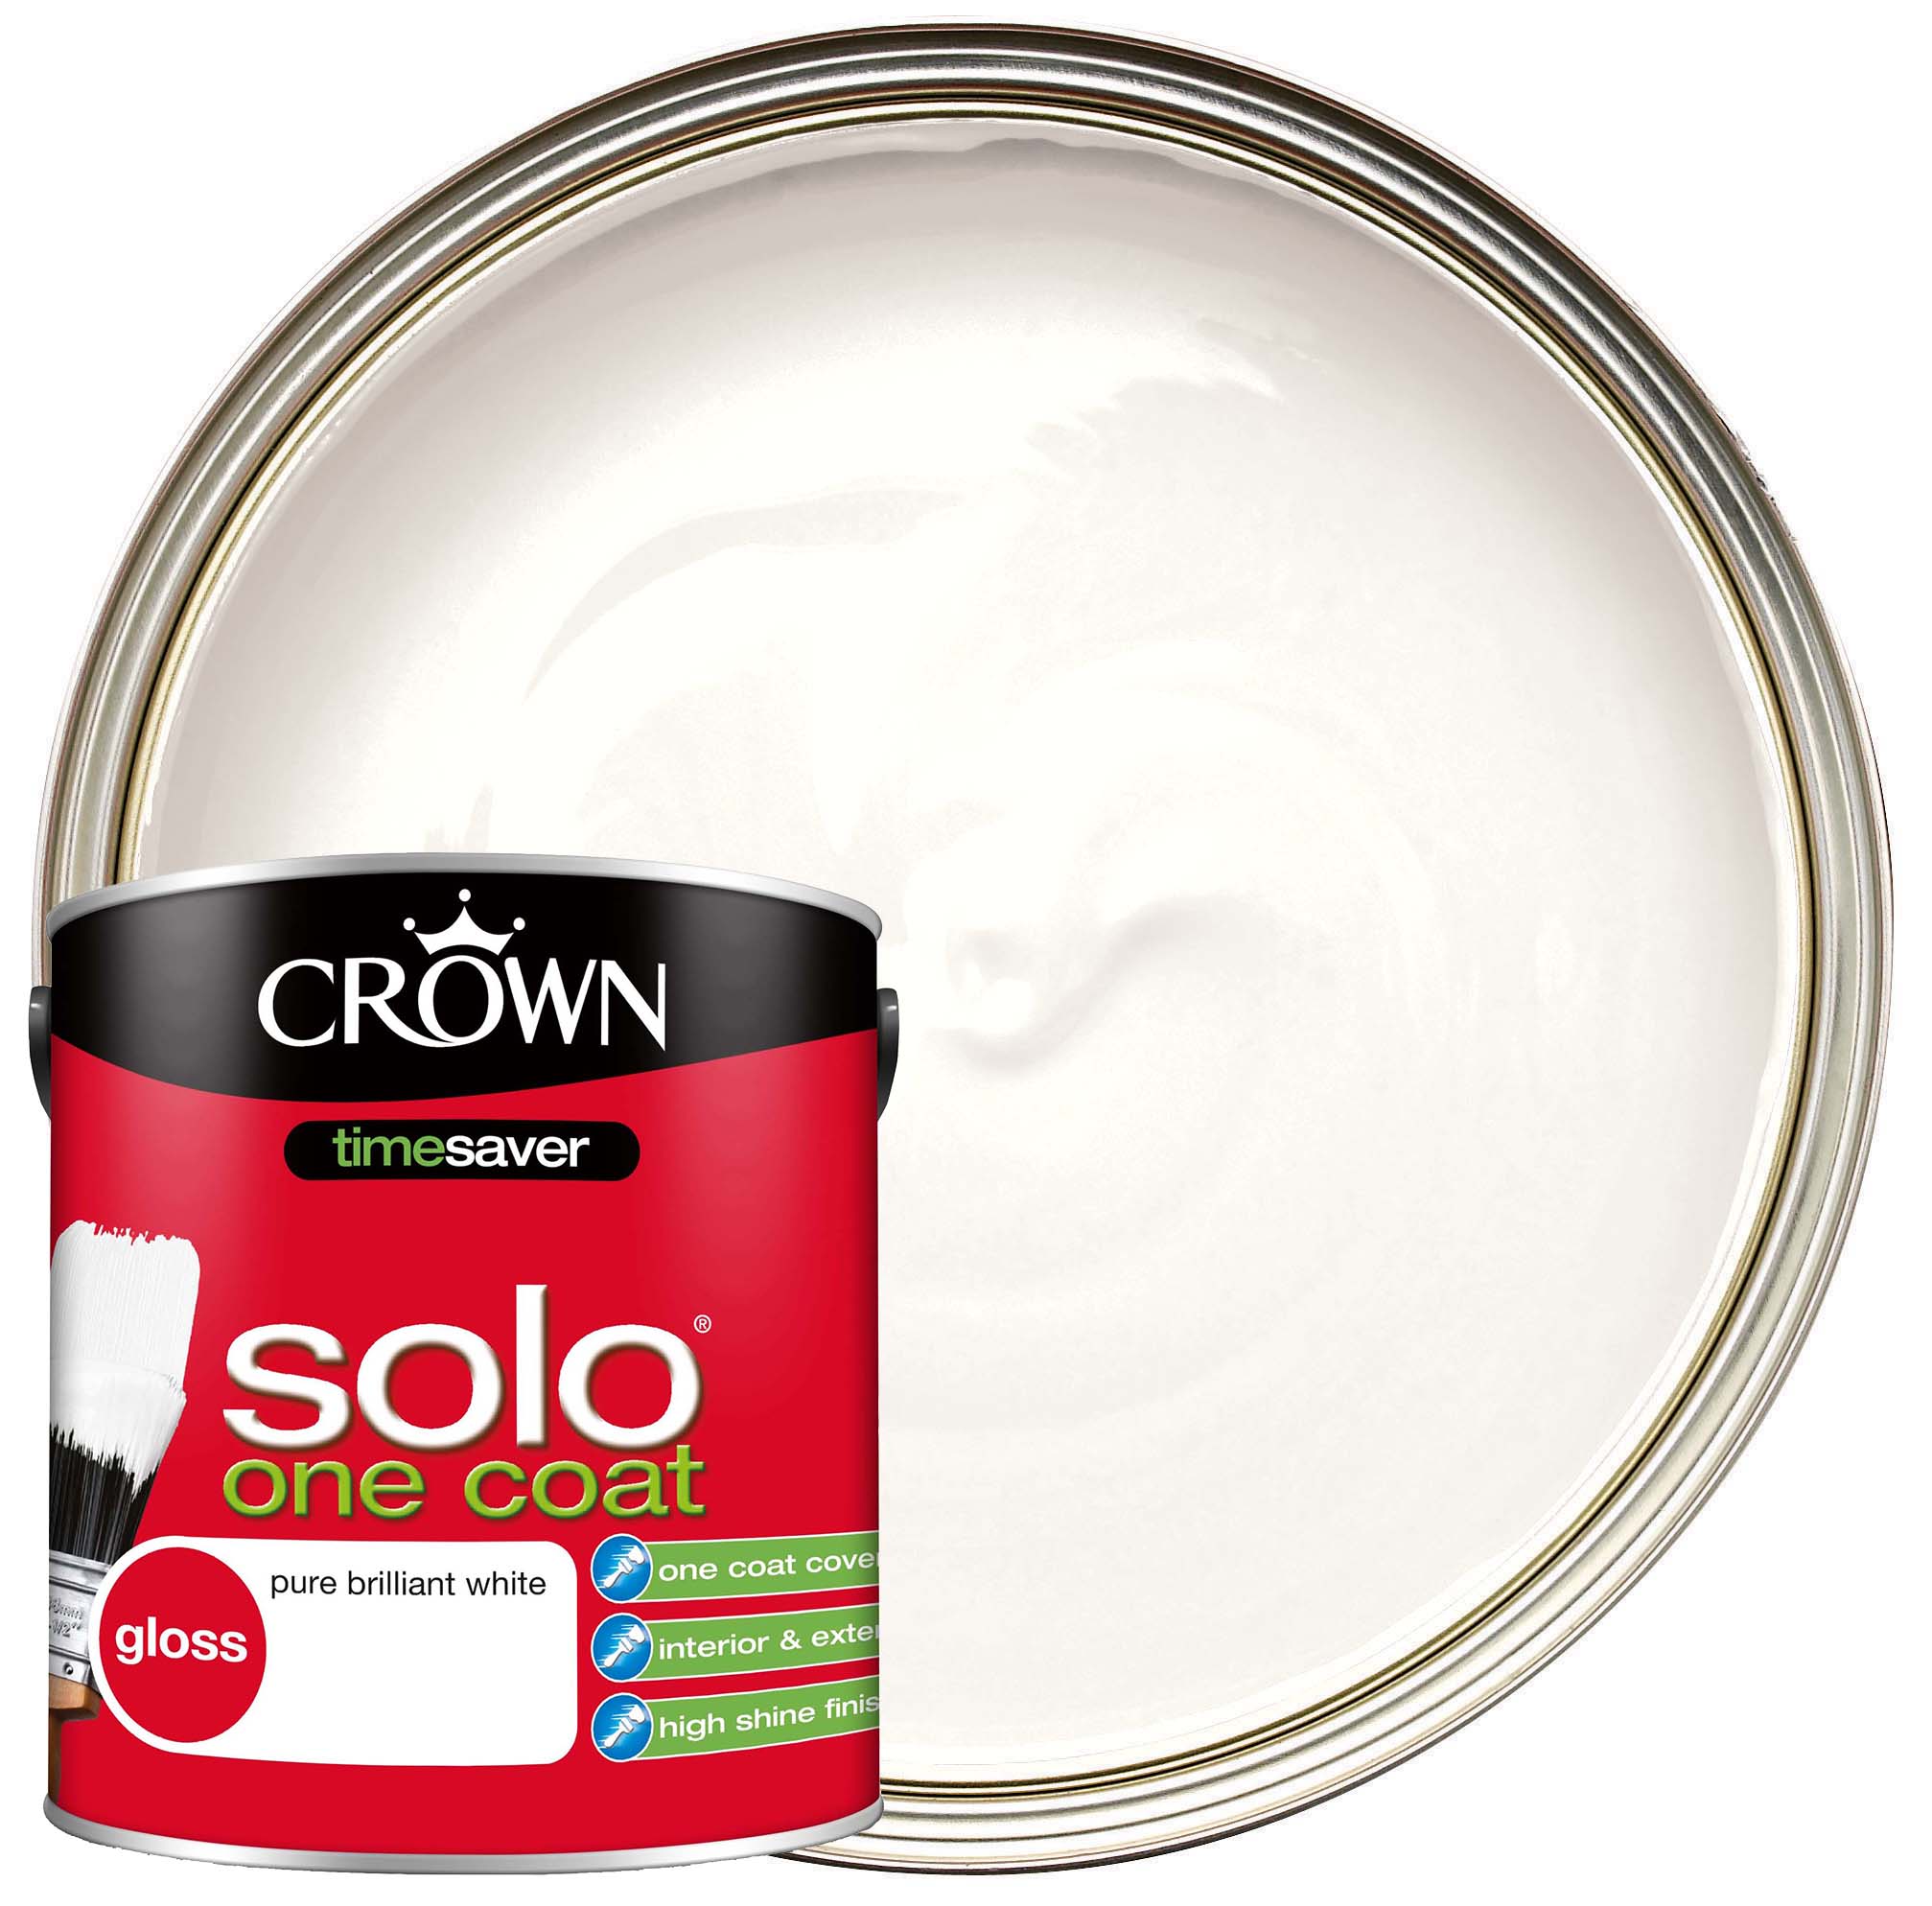 Image of Crown Solo Gloss Paint - Brilliant White - 2.5L